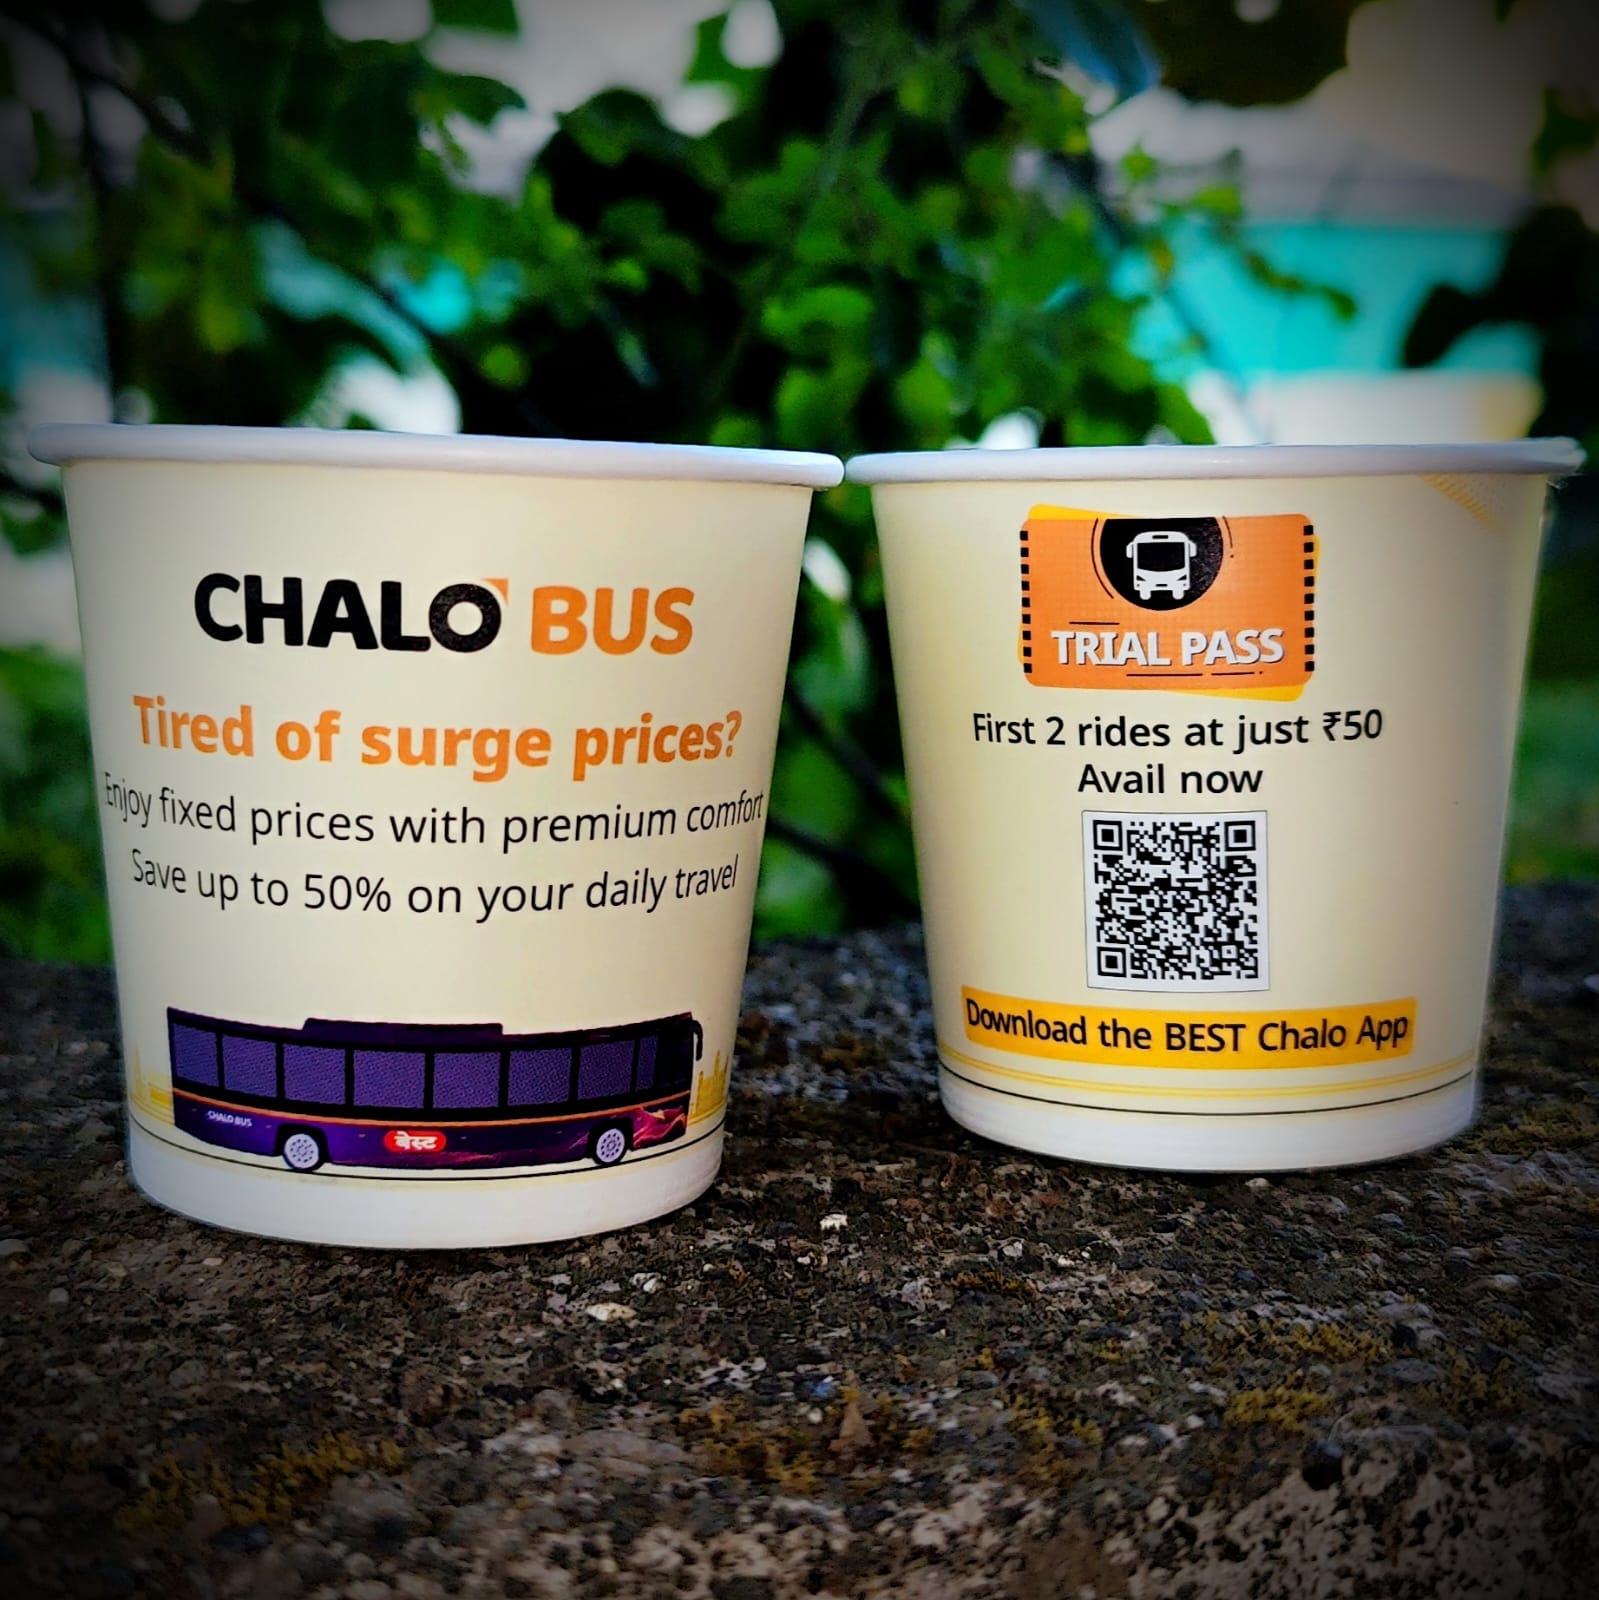 Paper cups for the promotion of an App - Chalo Bus